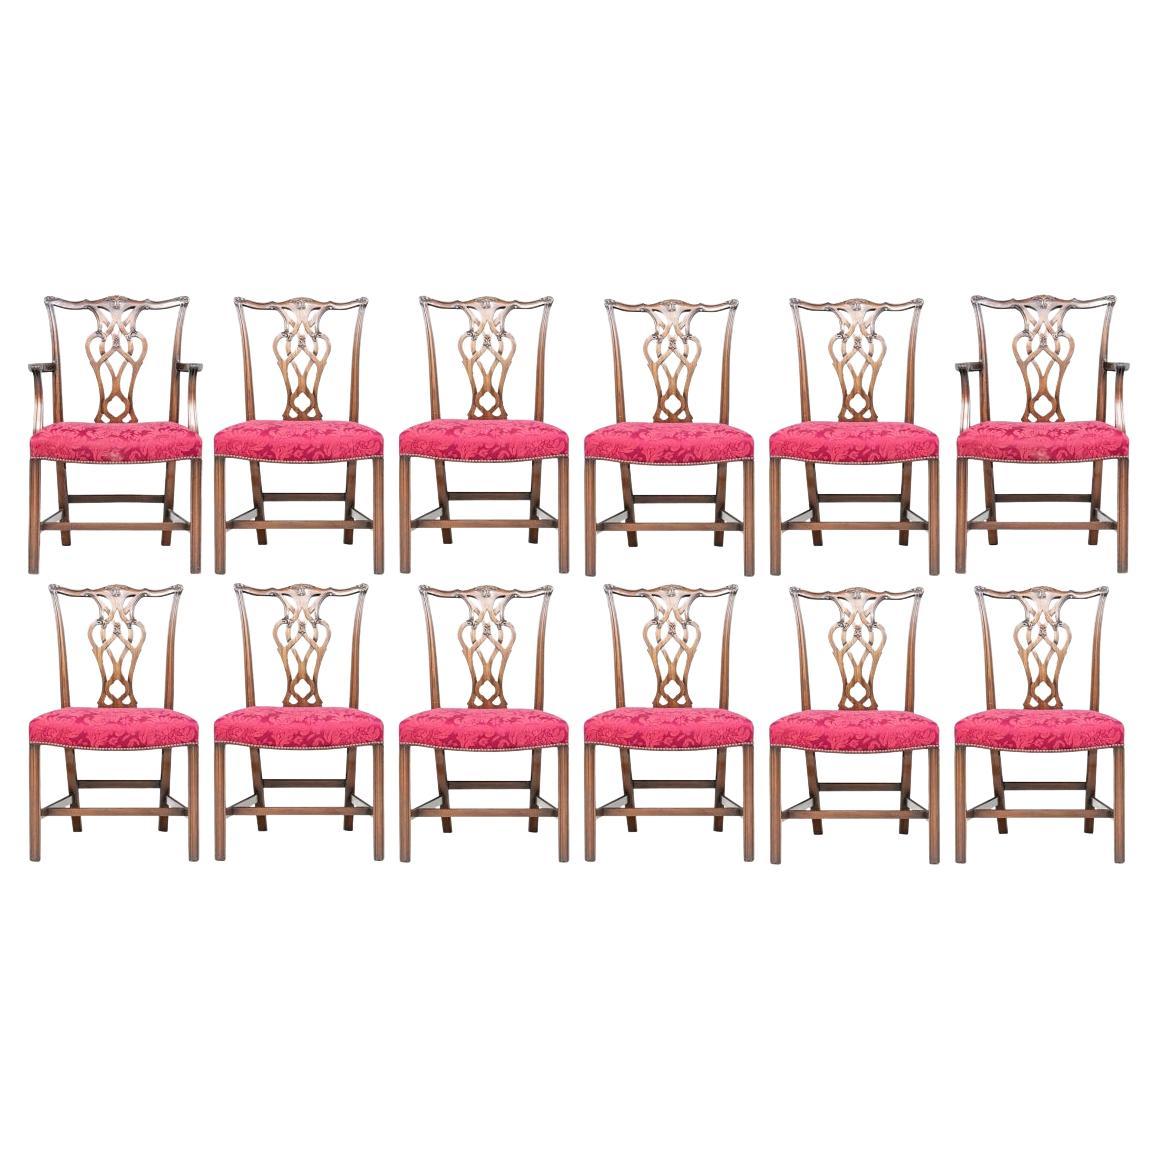 Set of 12 Fine Chippendale Style Mahogany Dining Chairs by Smith & Watson